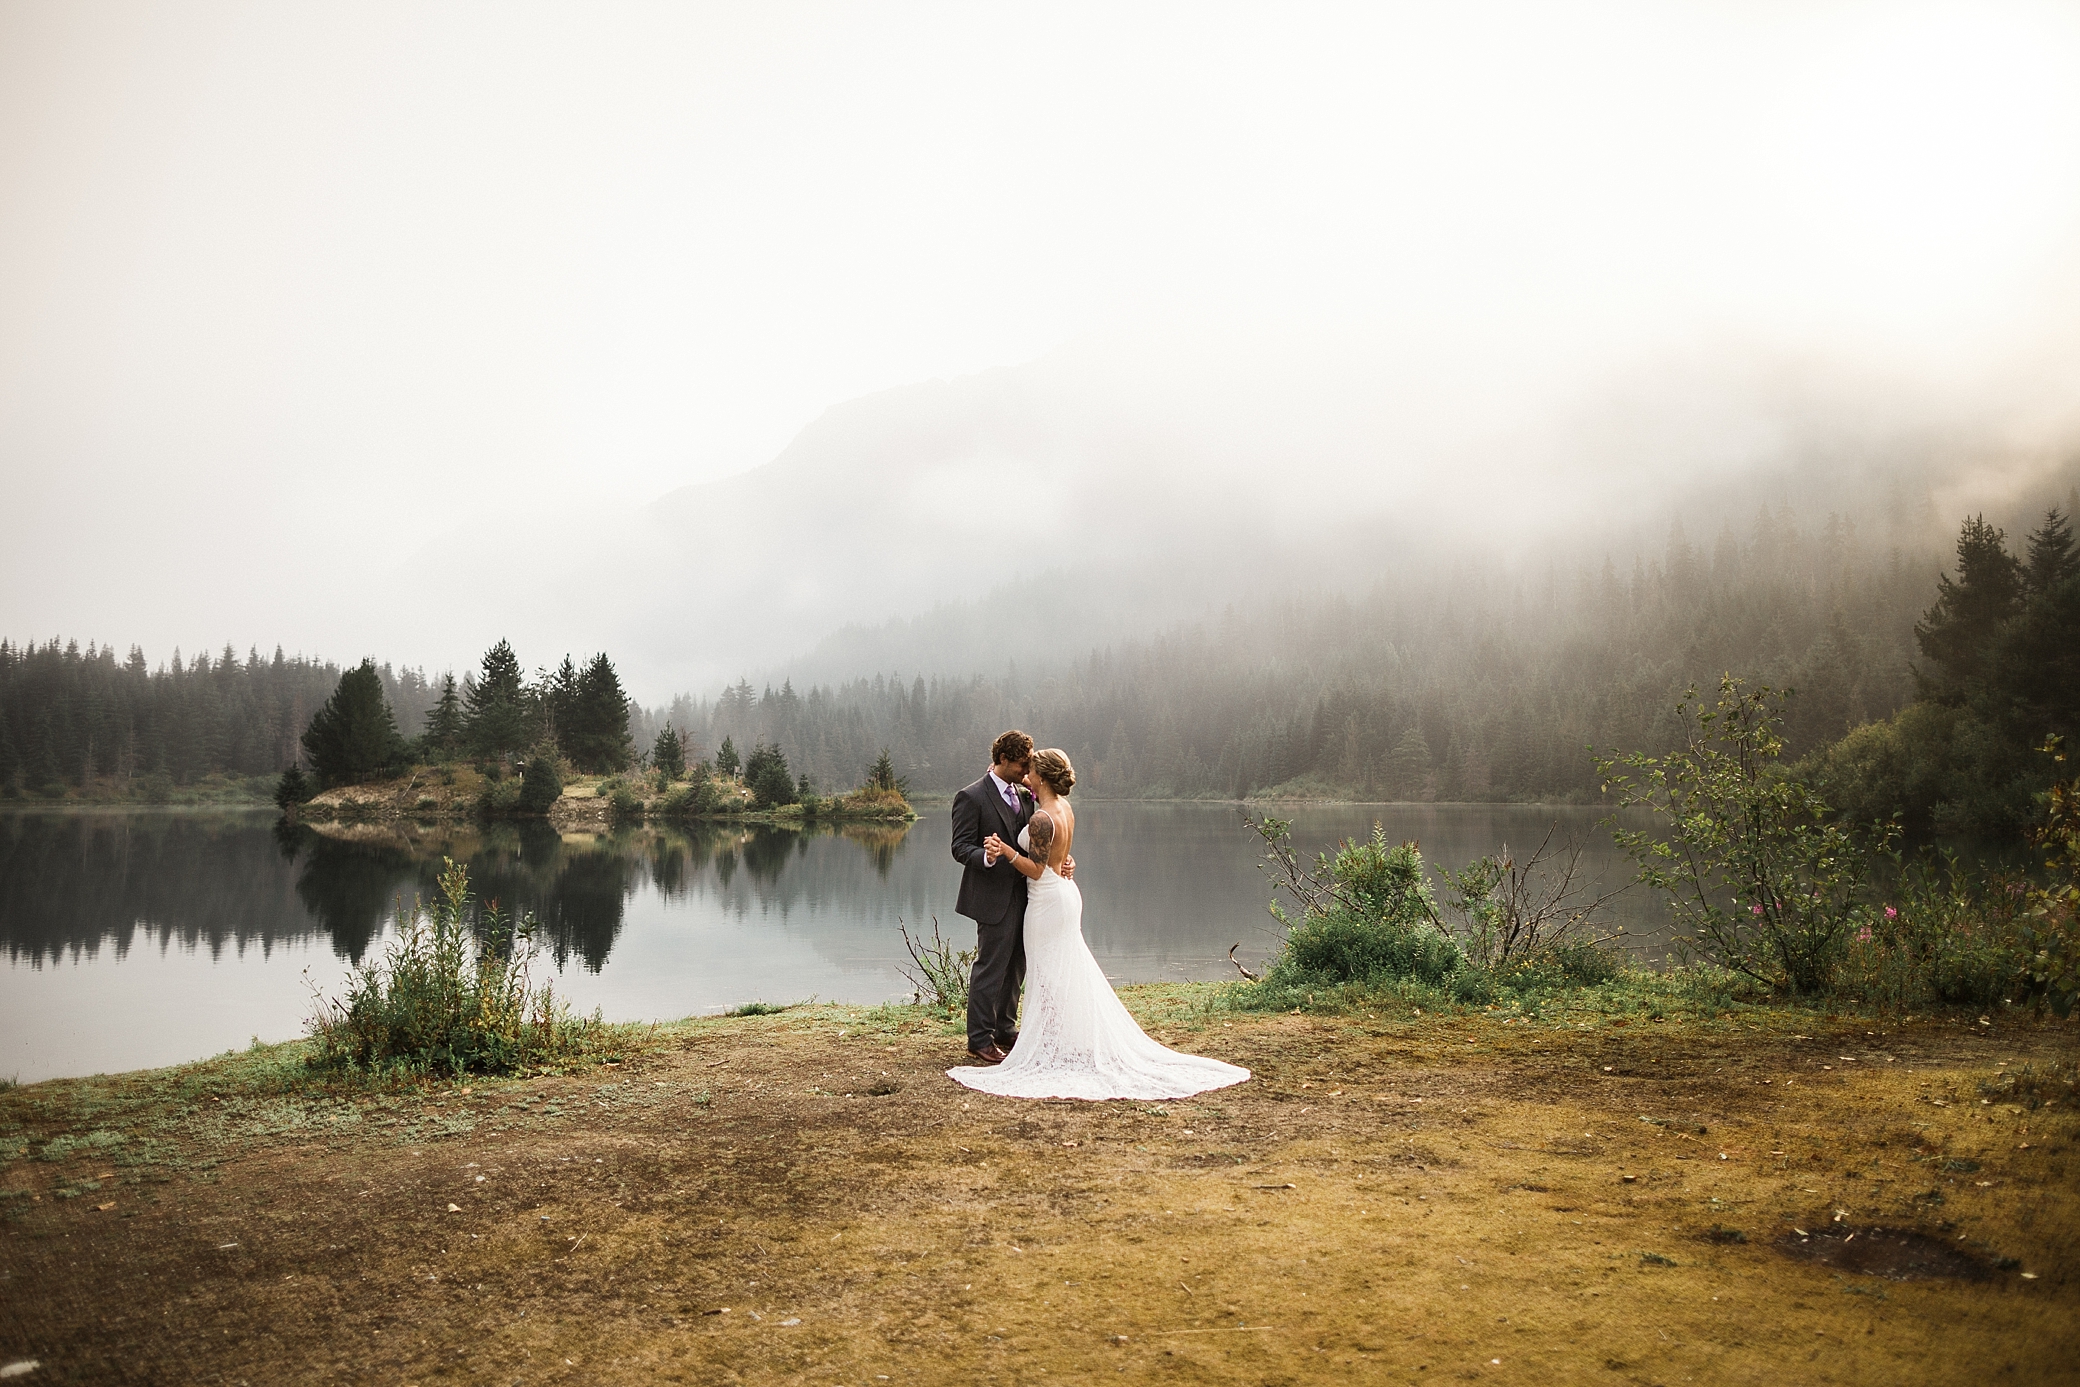 PNW Elopement at Gold Creek Pond in Snoqualmie, WA | Megan Montalvo Photography